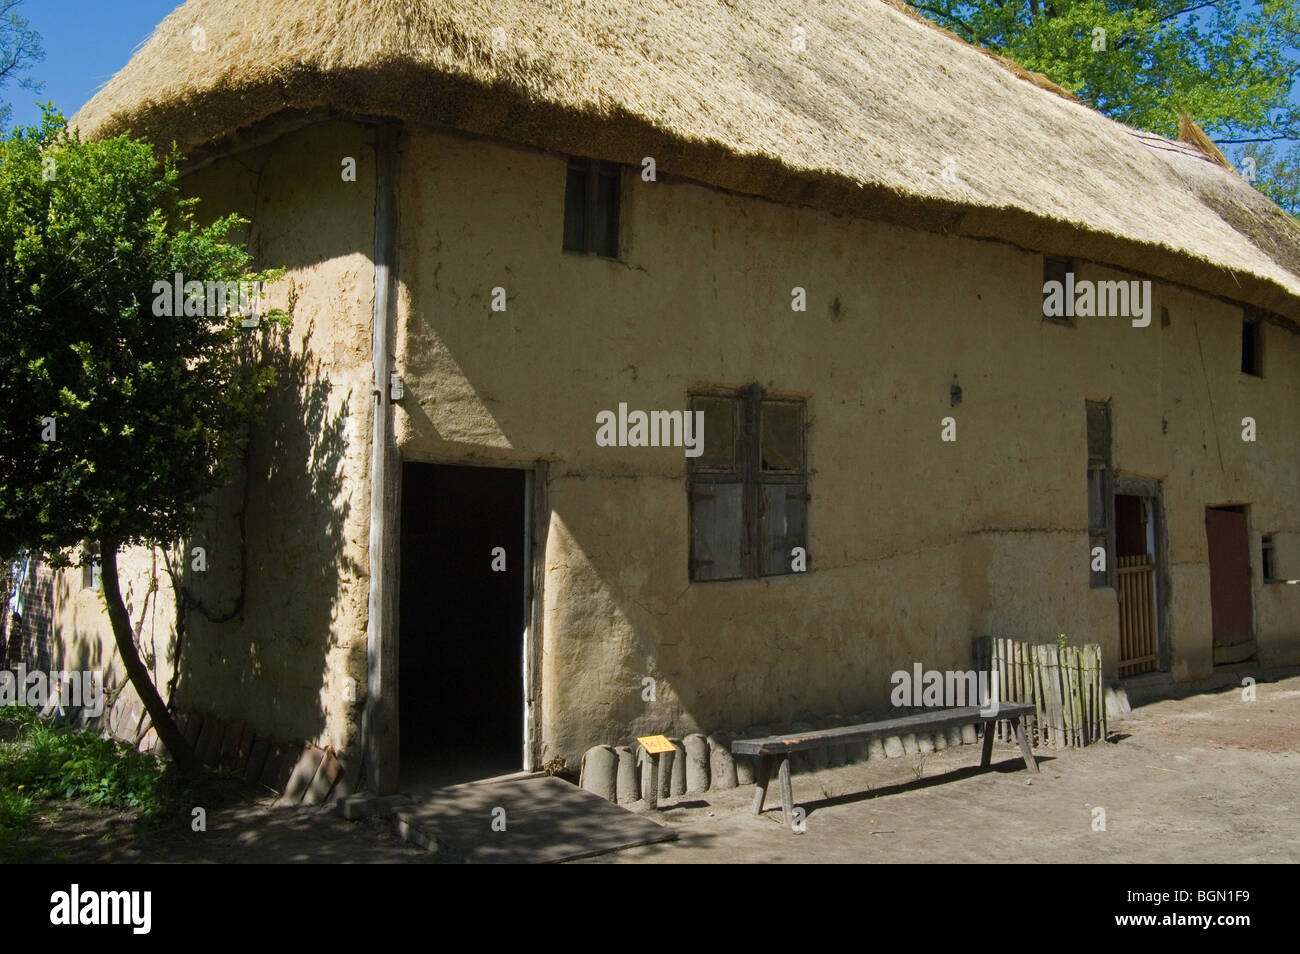 Traditional loam farmhouse with thatched roof in the open air museum Bokrijk, Belgium Stock Photo